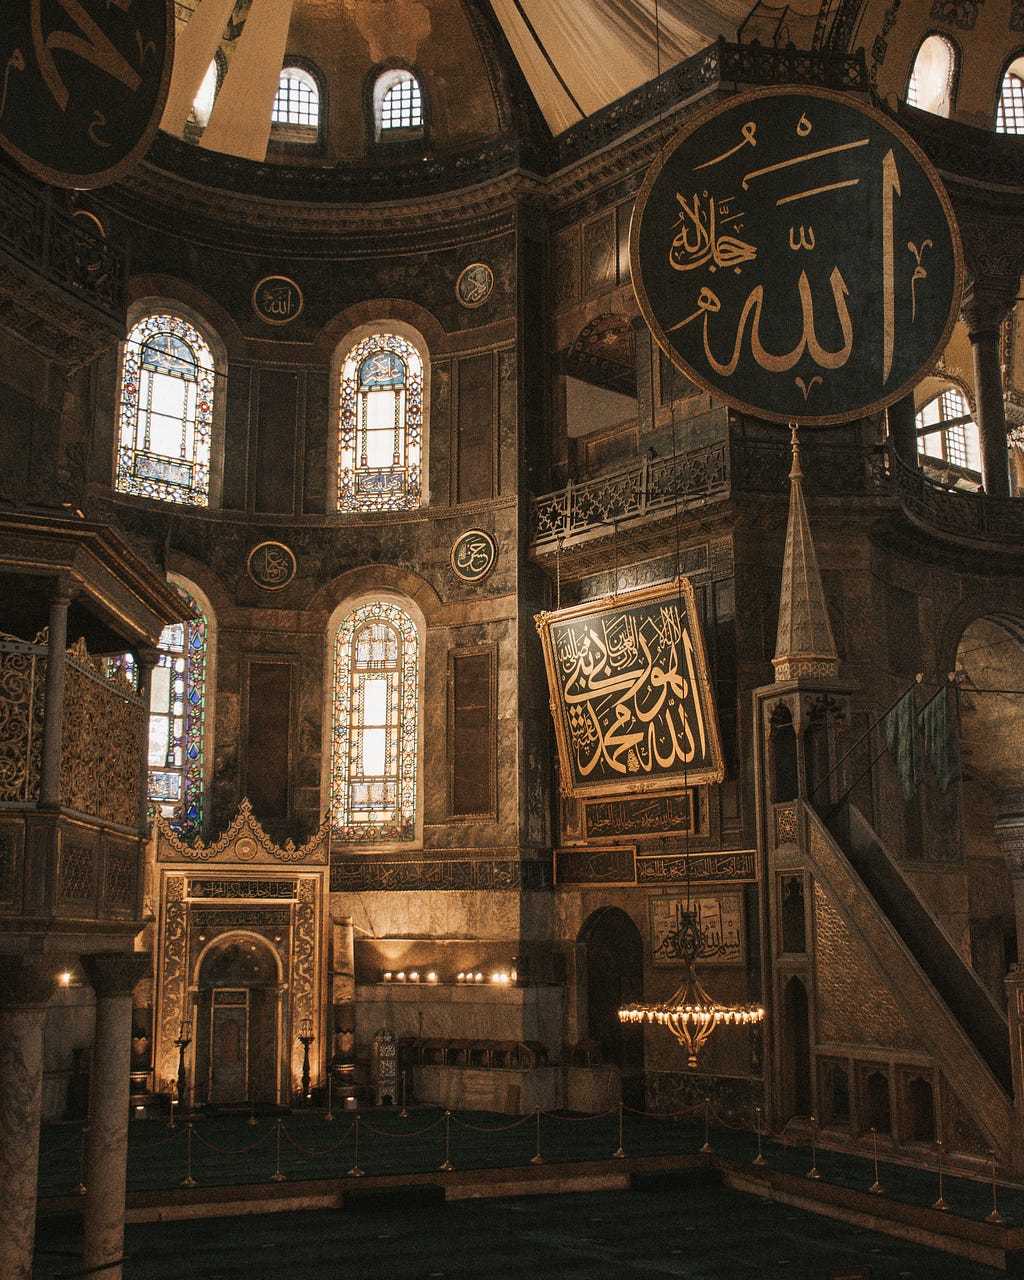 The mihrab and minbar, essential components of any mosque, are present in Hagia Sophia interiors.